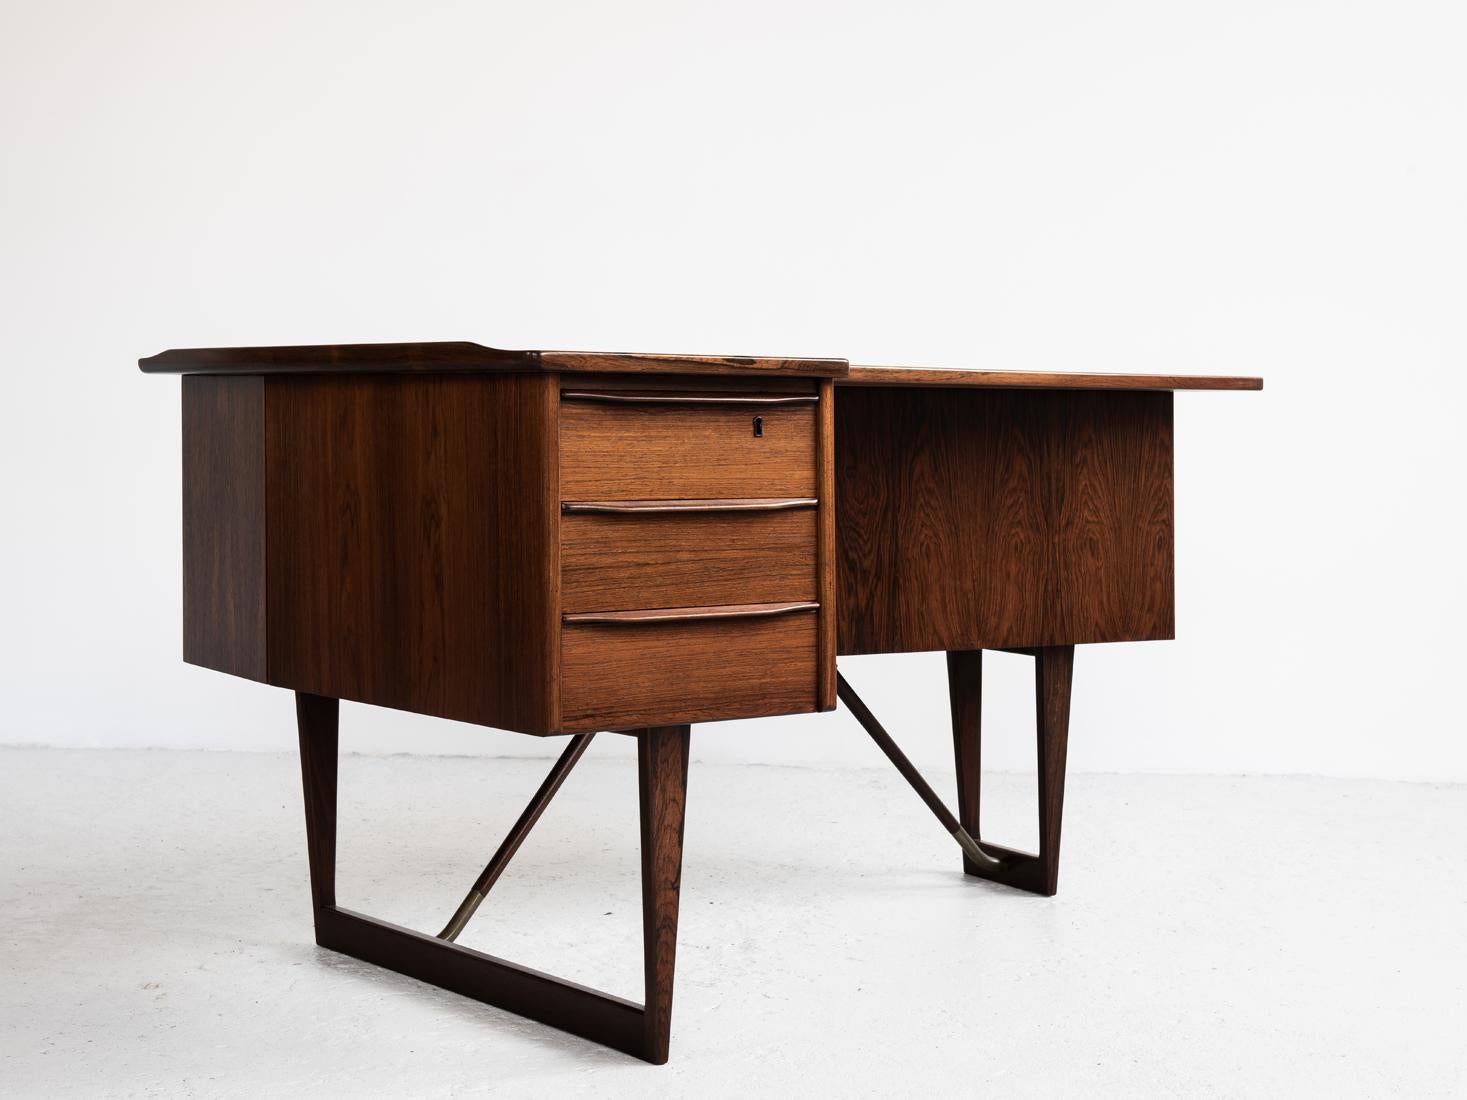 Midcentury boomerang desk designed by Peter Løvig Nielsen and manufactured by Hedensted in Denmark in the 1960s. This beautiful design piece is made of high quality materials and manufacturing. It has 3 drawers in the front and a book shelf and bar